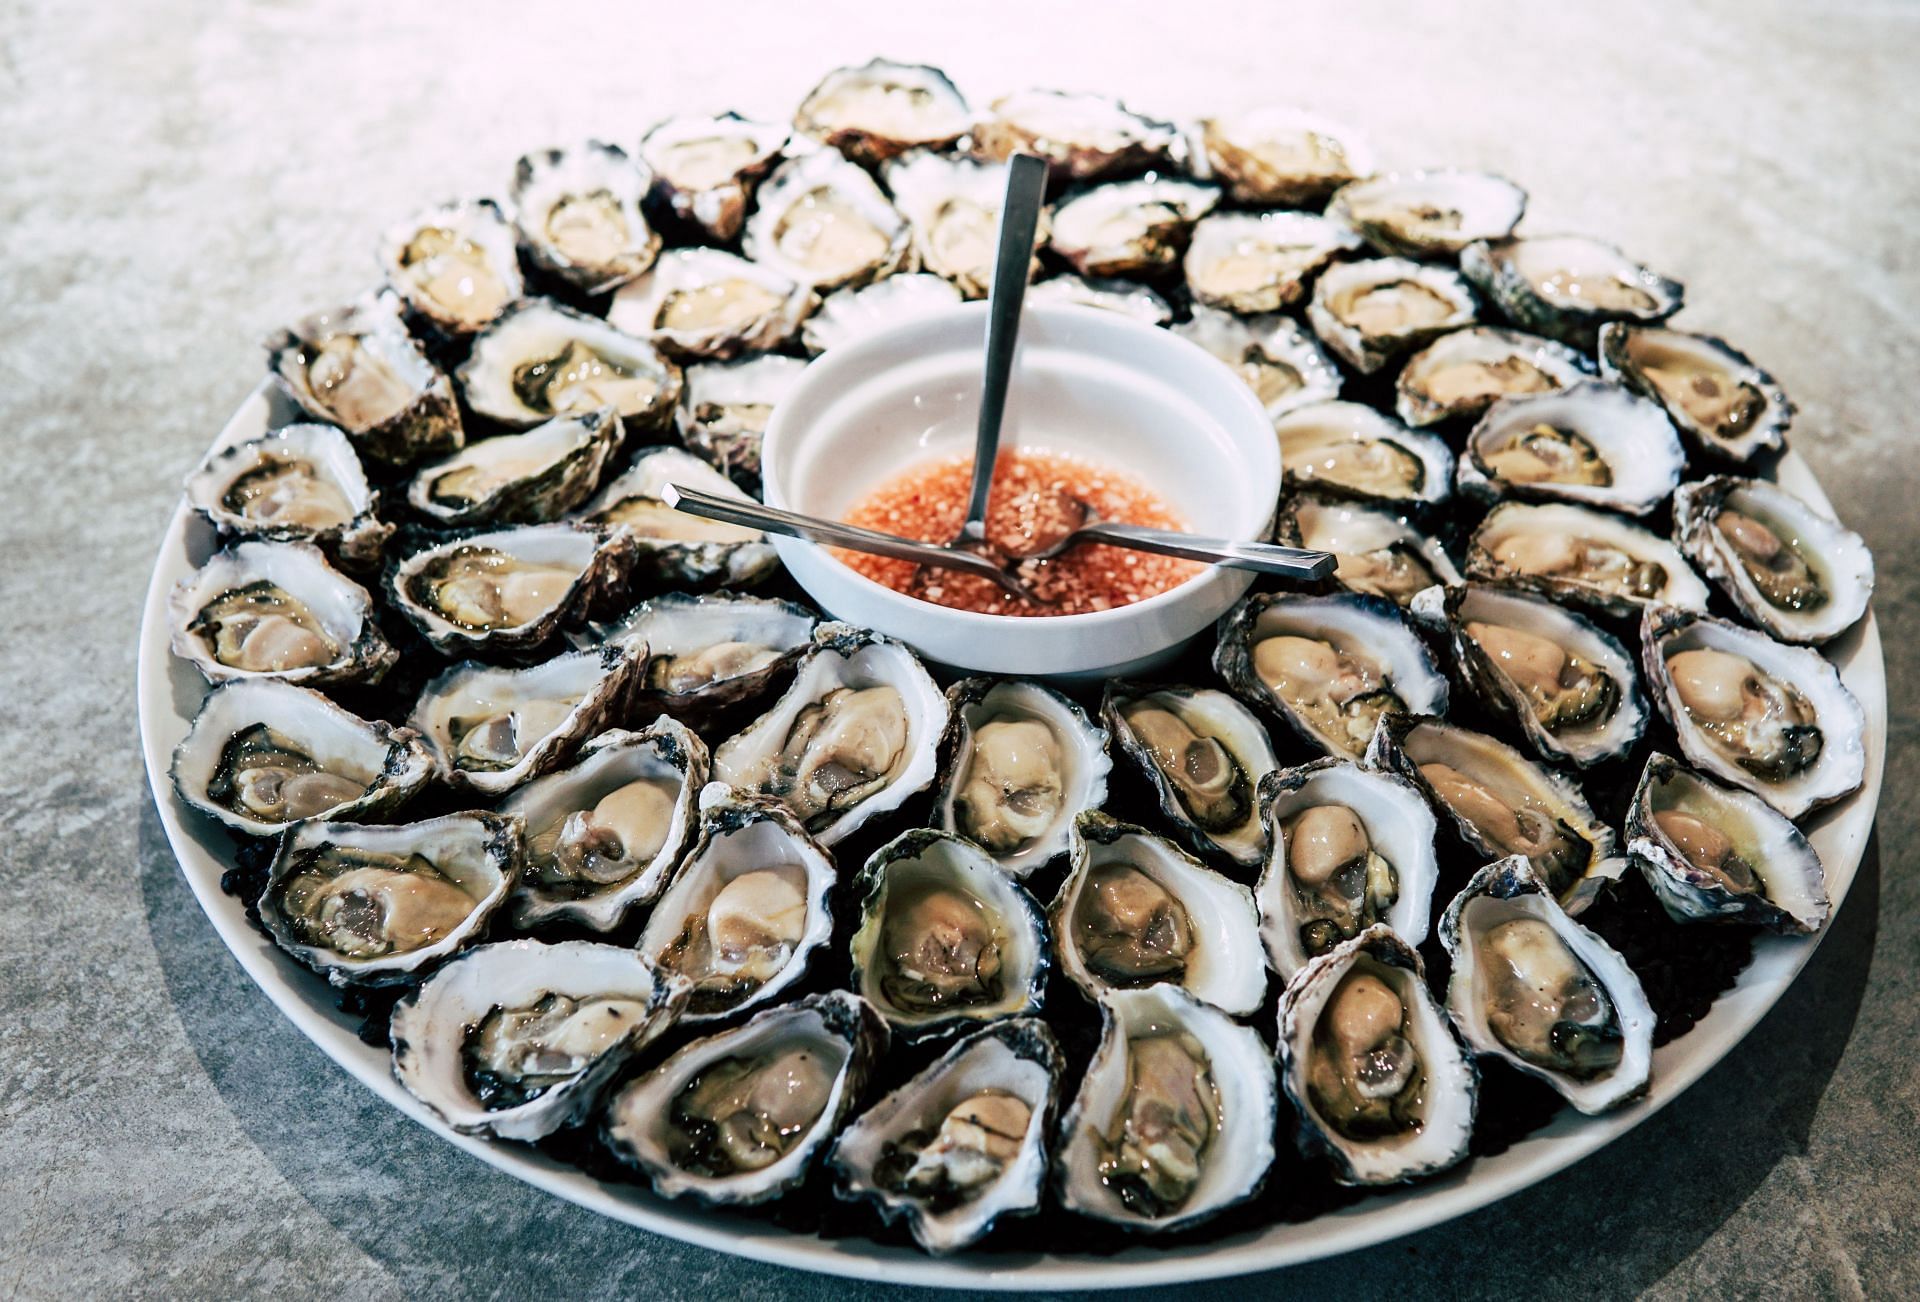 Did you know that oysters can help you get luscious locks? (Image via Pexels)